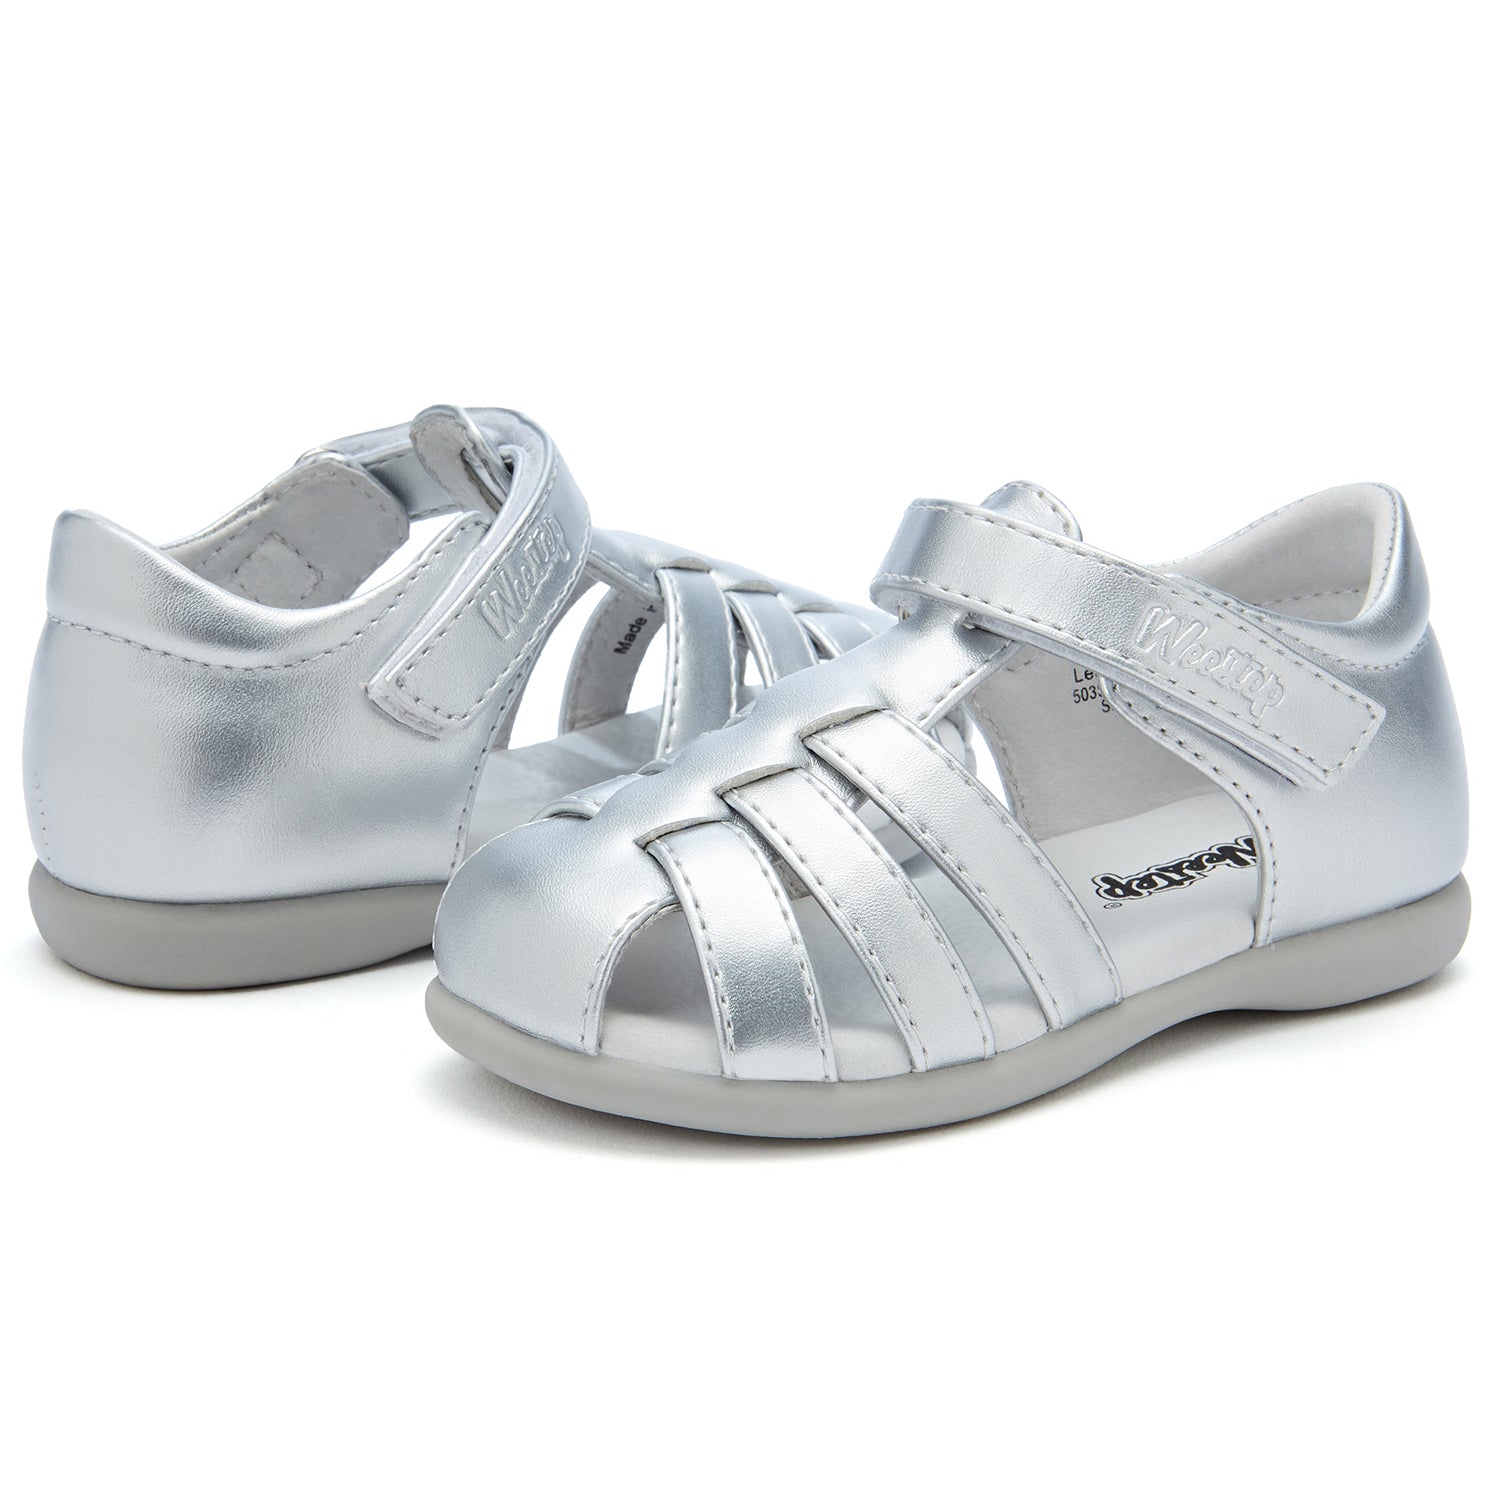 Toddler Simple Closed Toe Leather Sandal